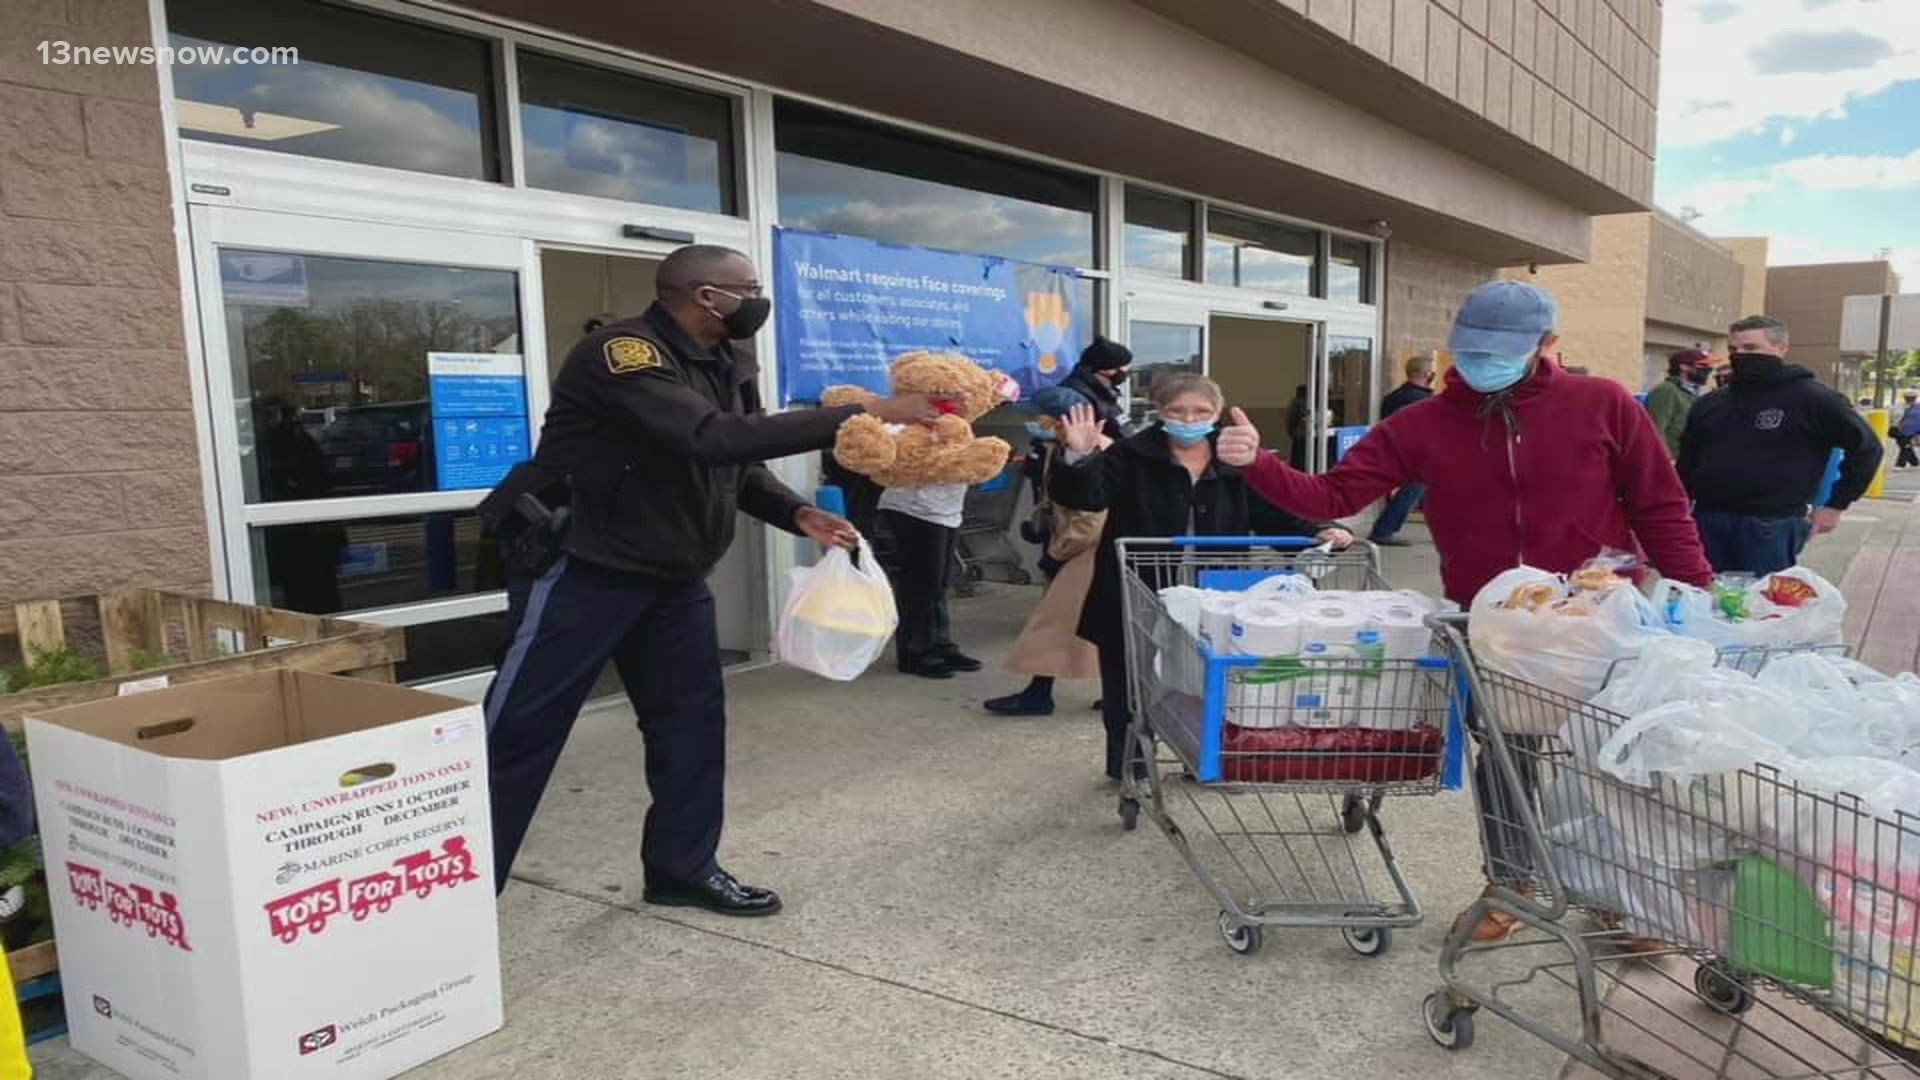 Suffolk Police Department saw a record-breaking year, collecting unwrapped toys that will be donated to children for Christmas.